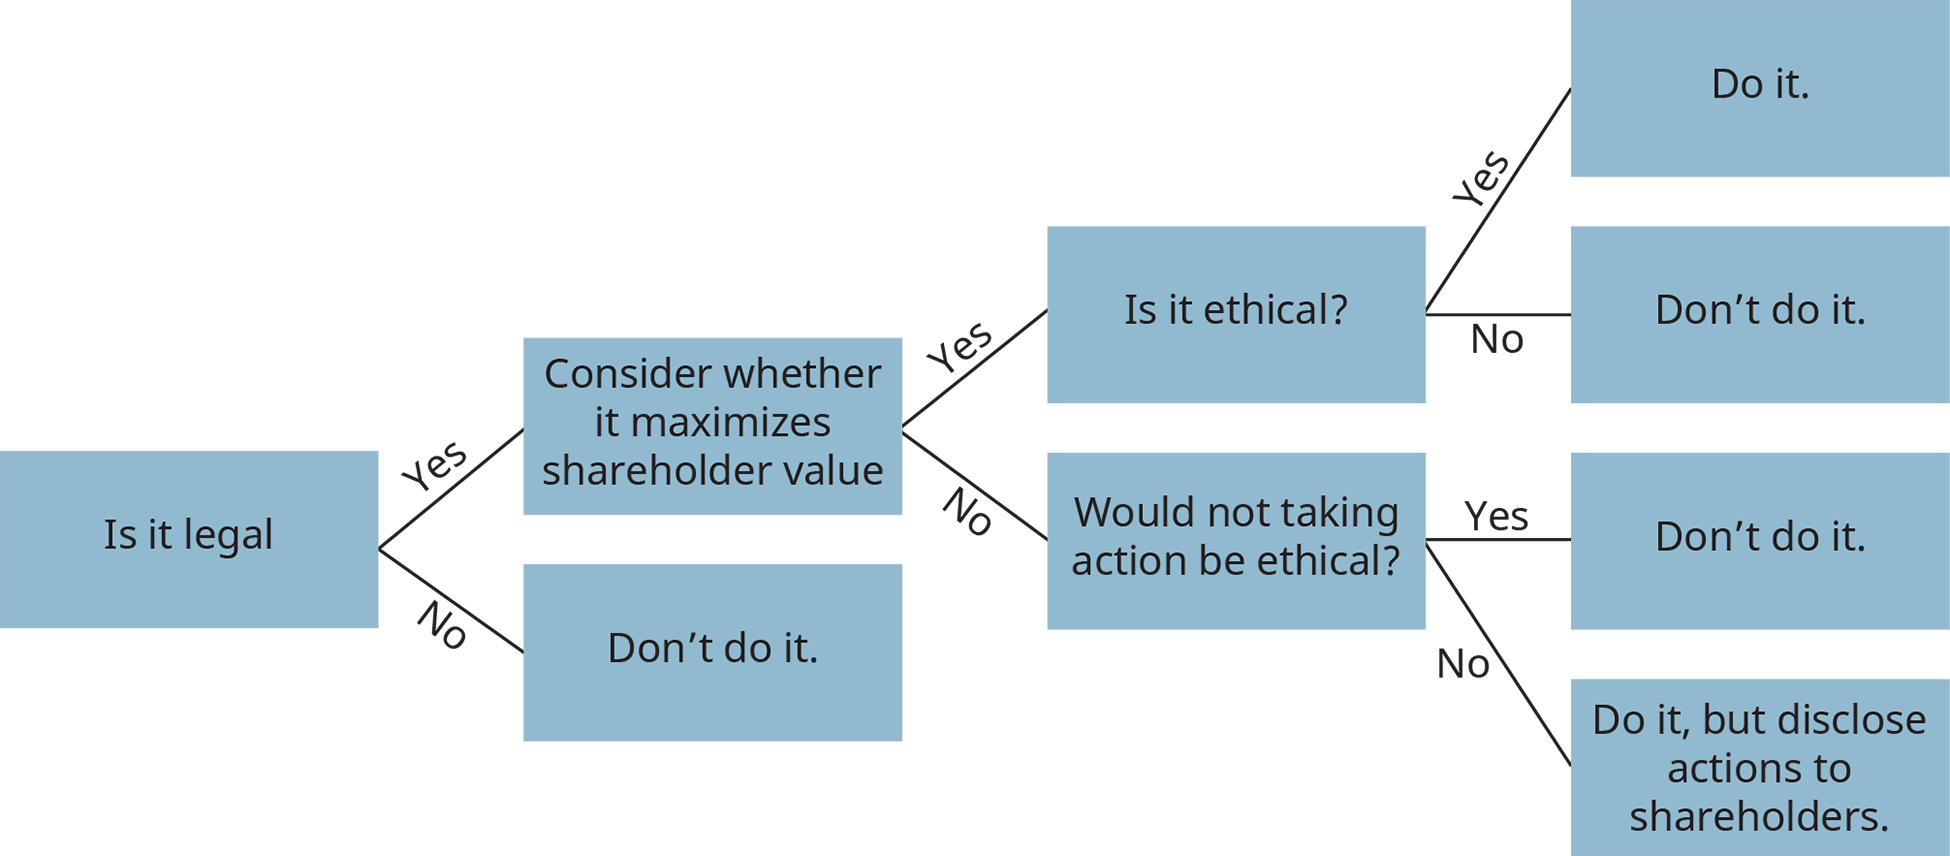 A diagram of a decision tree illustrates the process of ethical decision-making.